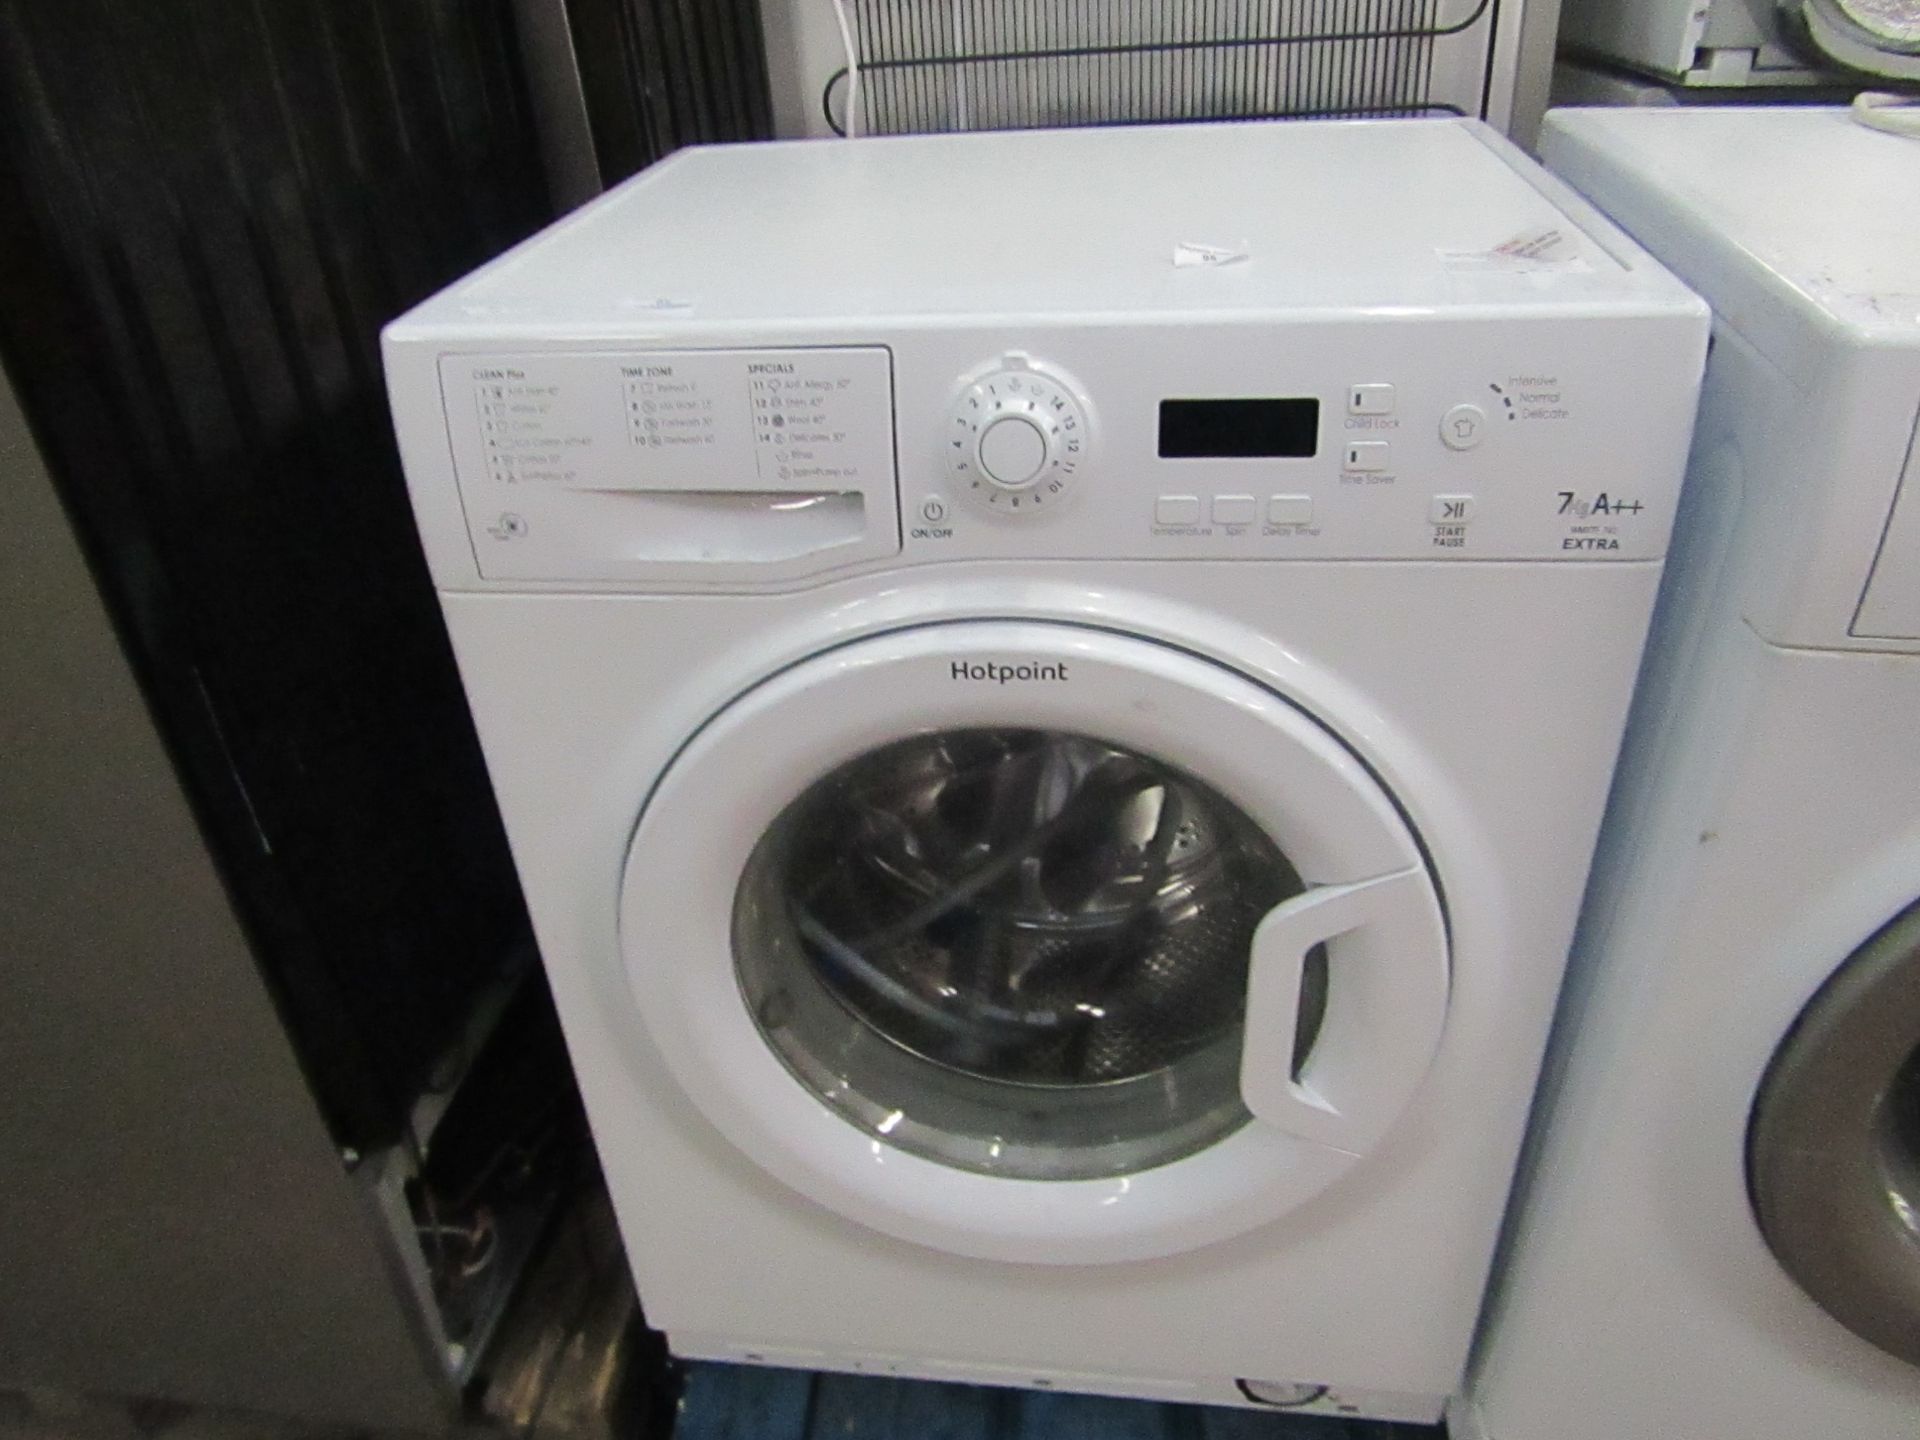 Hotpoint 7Kg A+++ washing machine, powers on and spins.